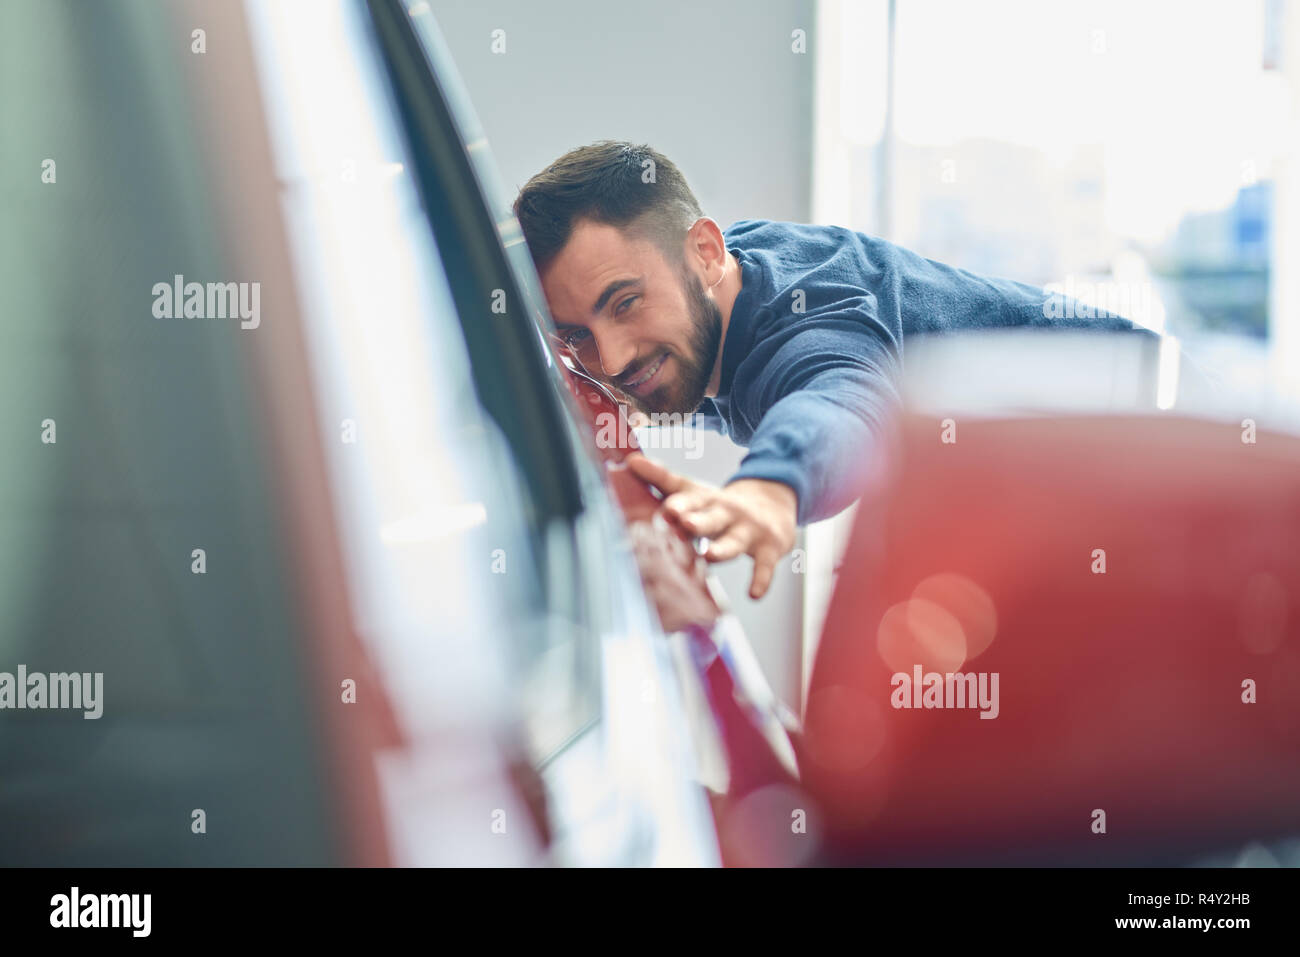 Brunette man with beard coming to salon and buying auto. Young happy client in blue sweater touching new red auto. Attractive driver looking in side mirror and holding his hands on vehicle. Stock Photo